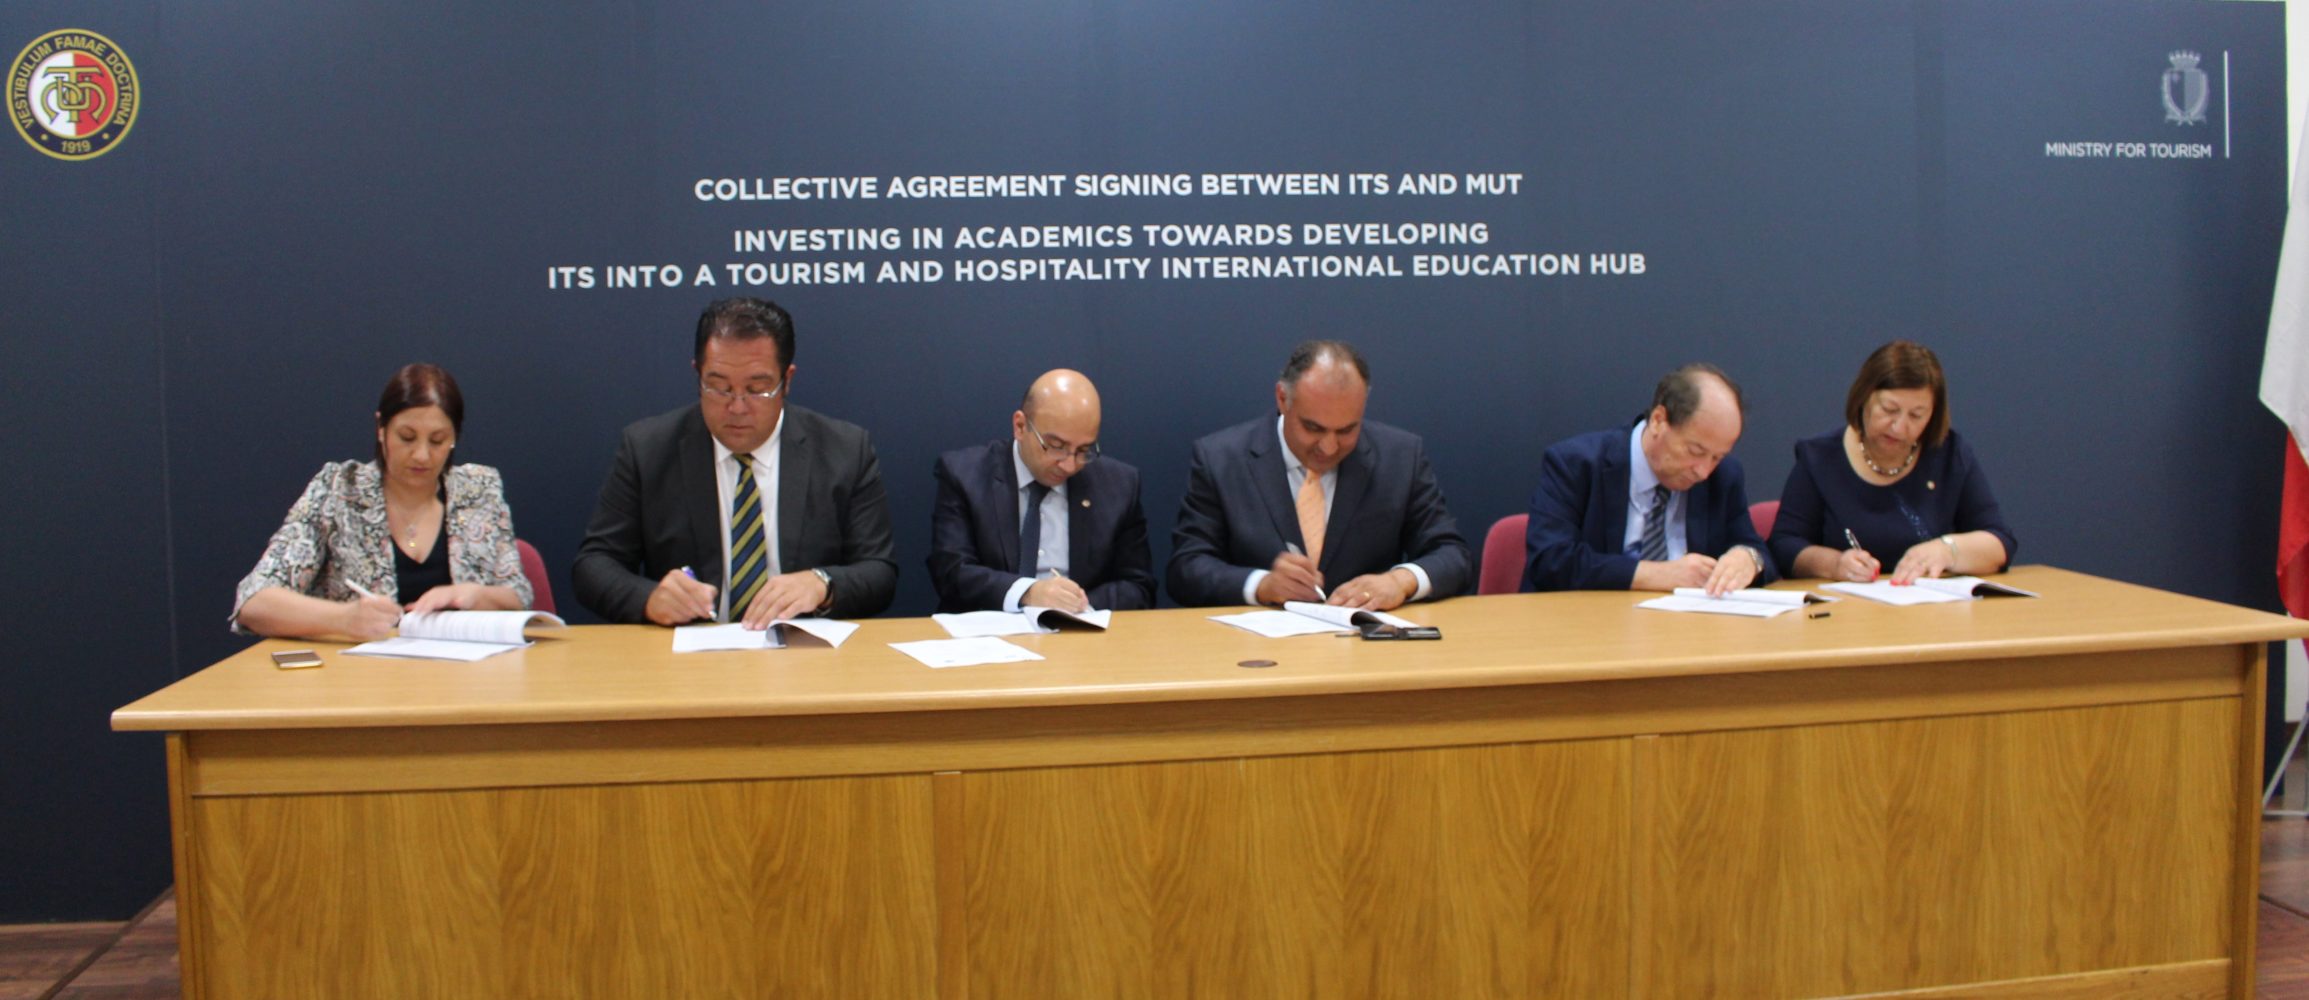 Collective Agreement Signing between ITS and MUT